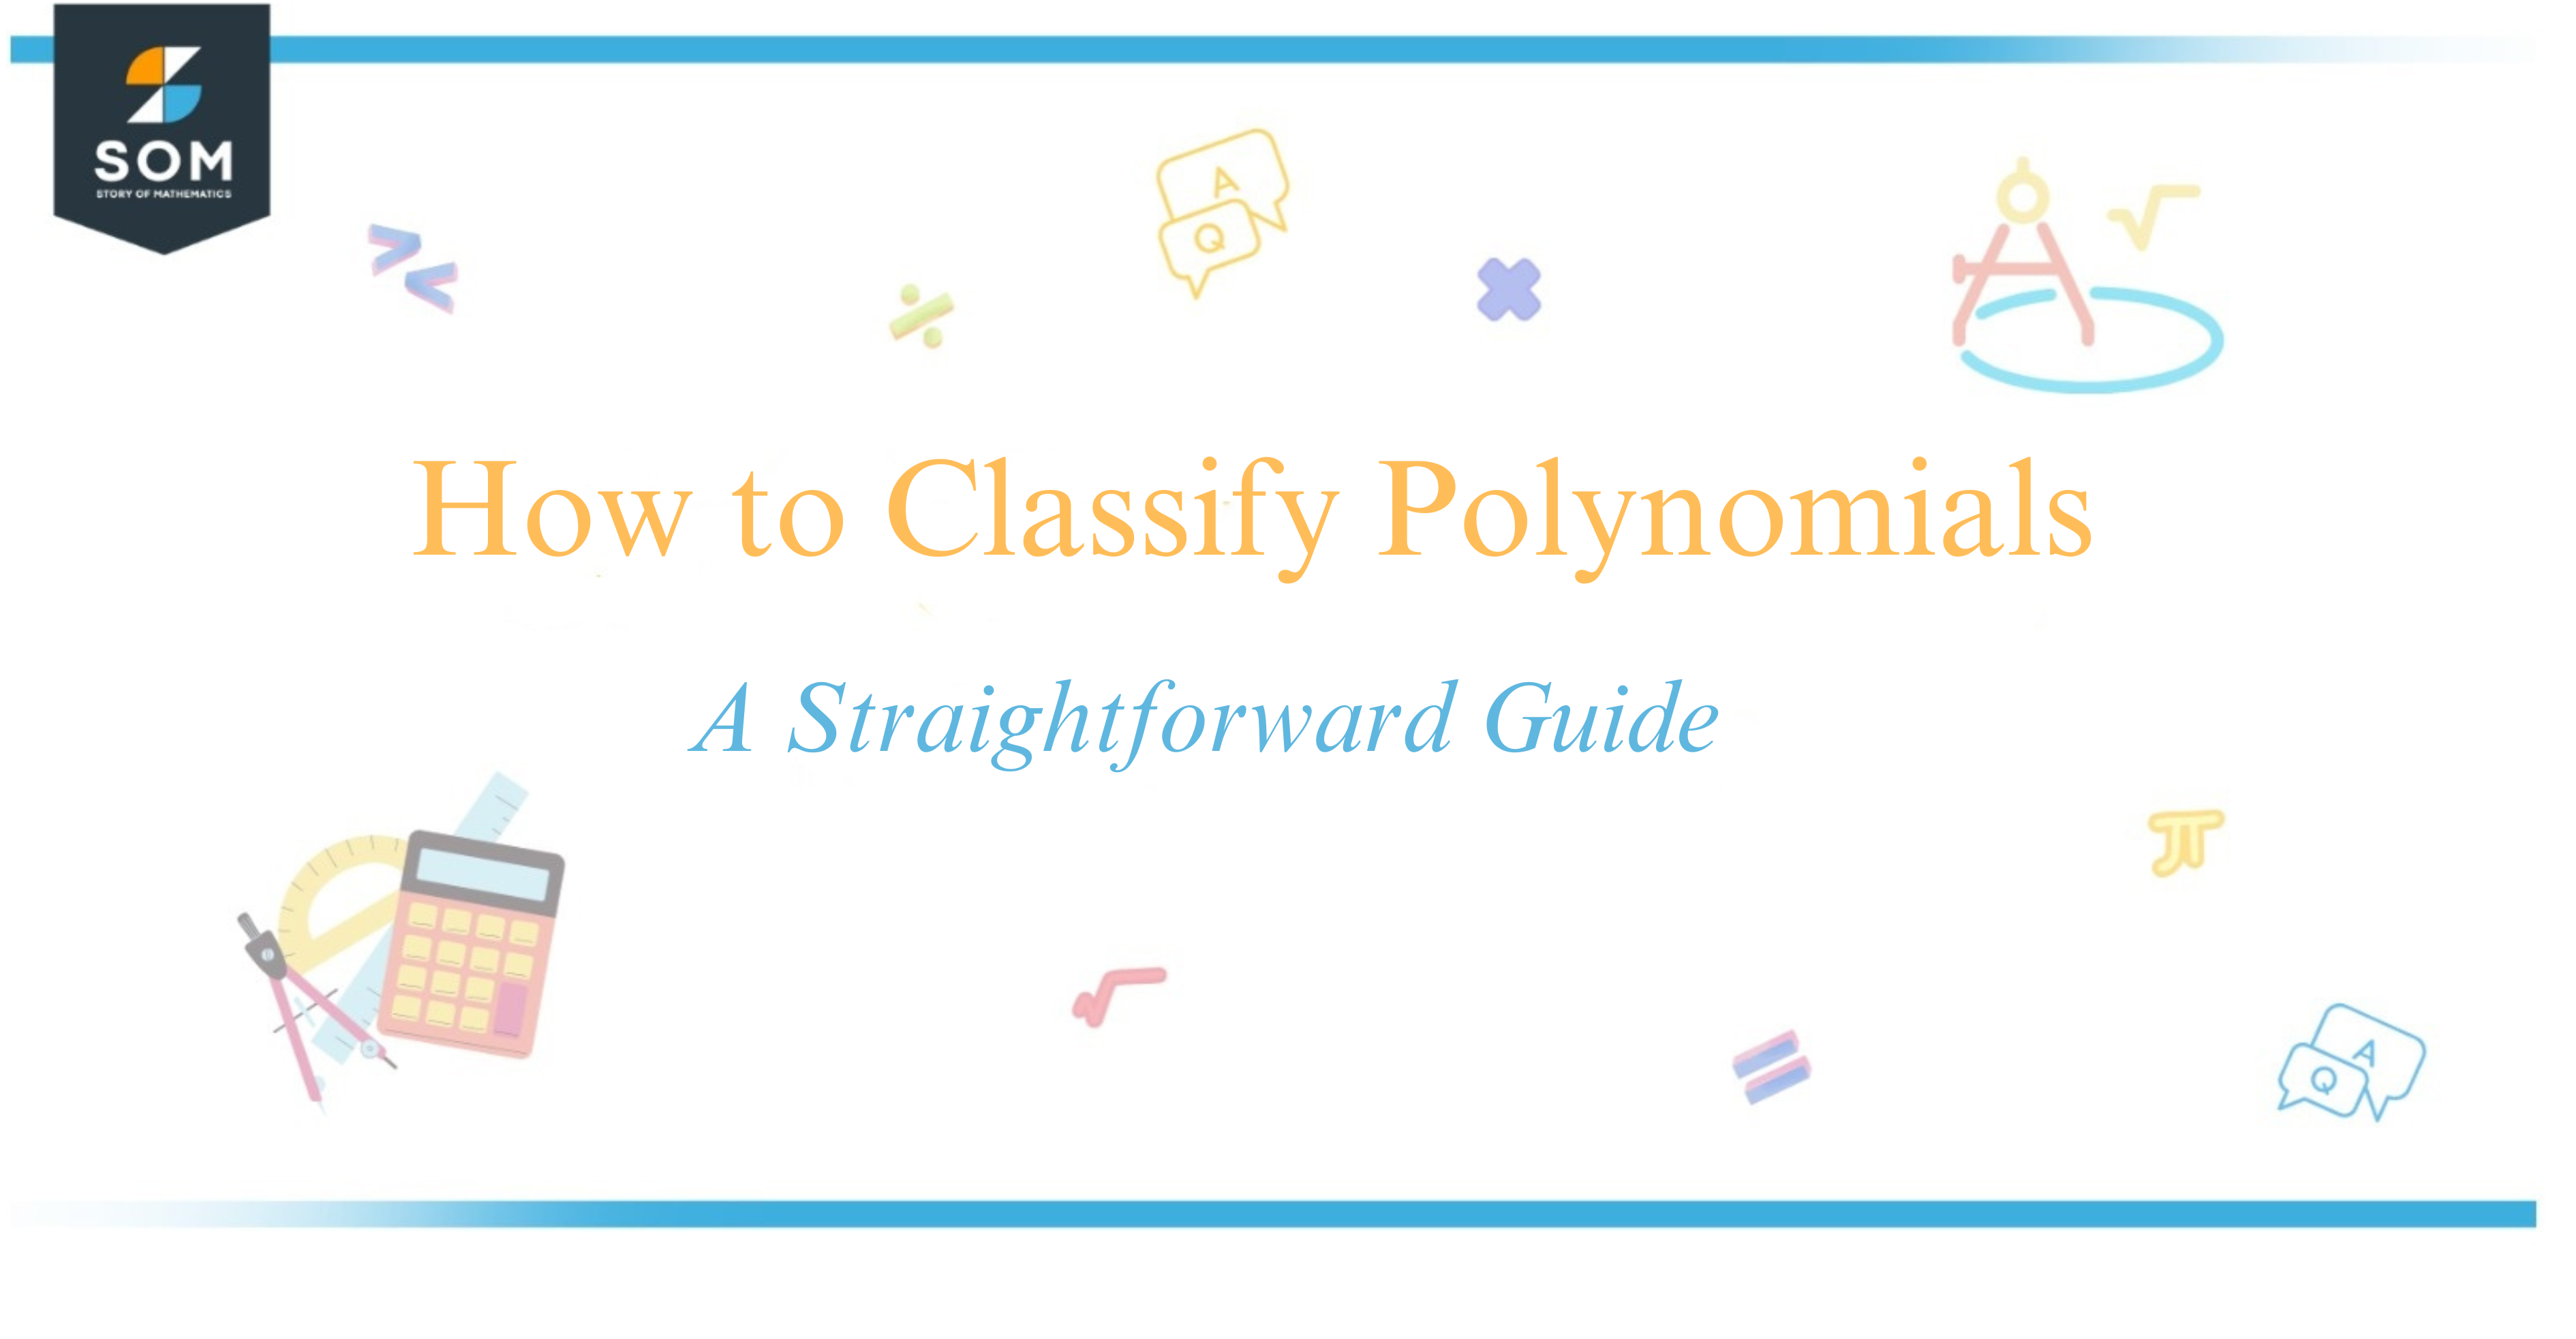 How to Classify Polynomials A Straightforward Guide